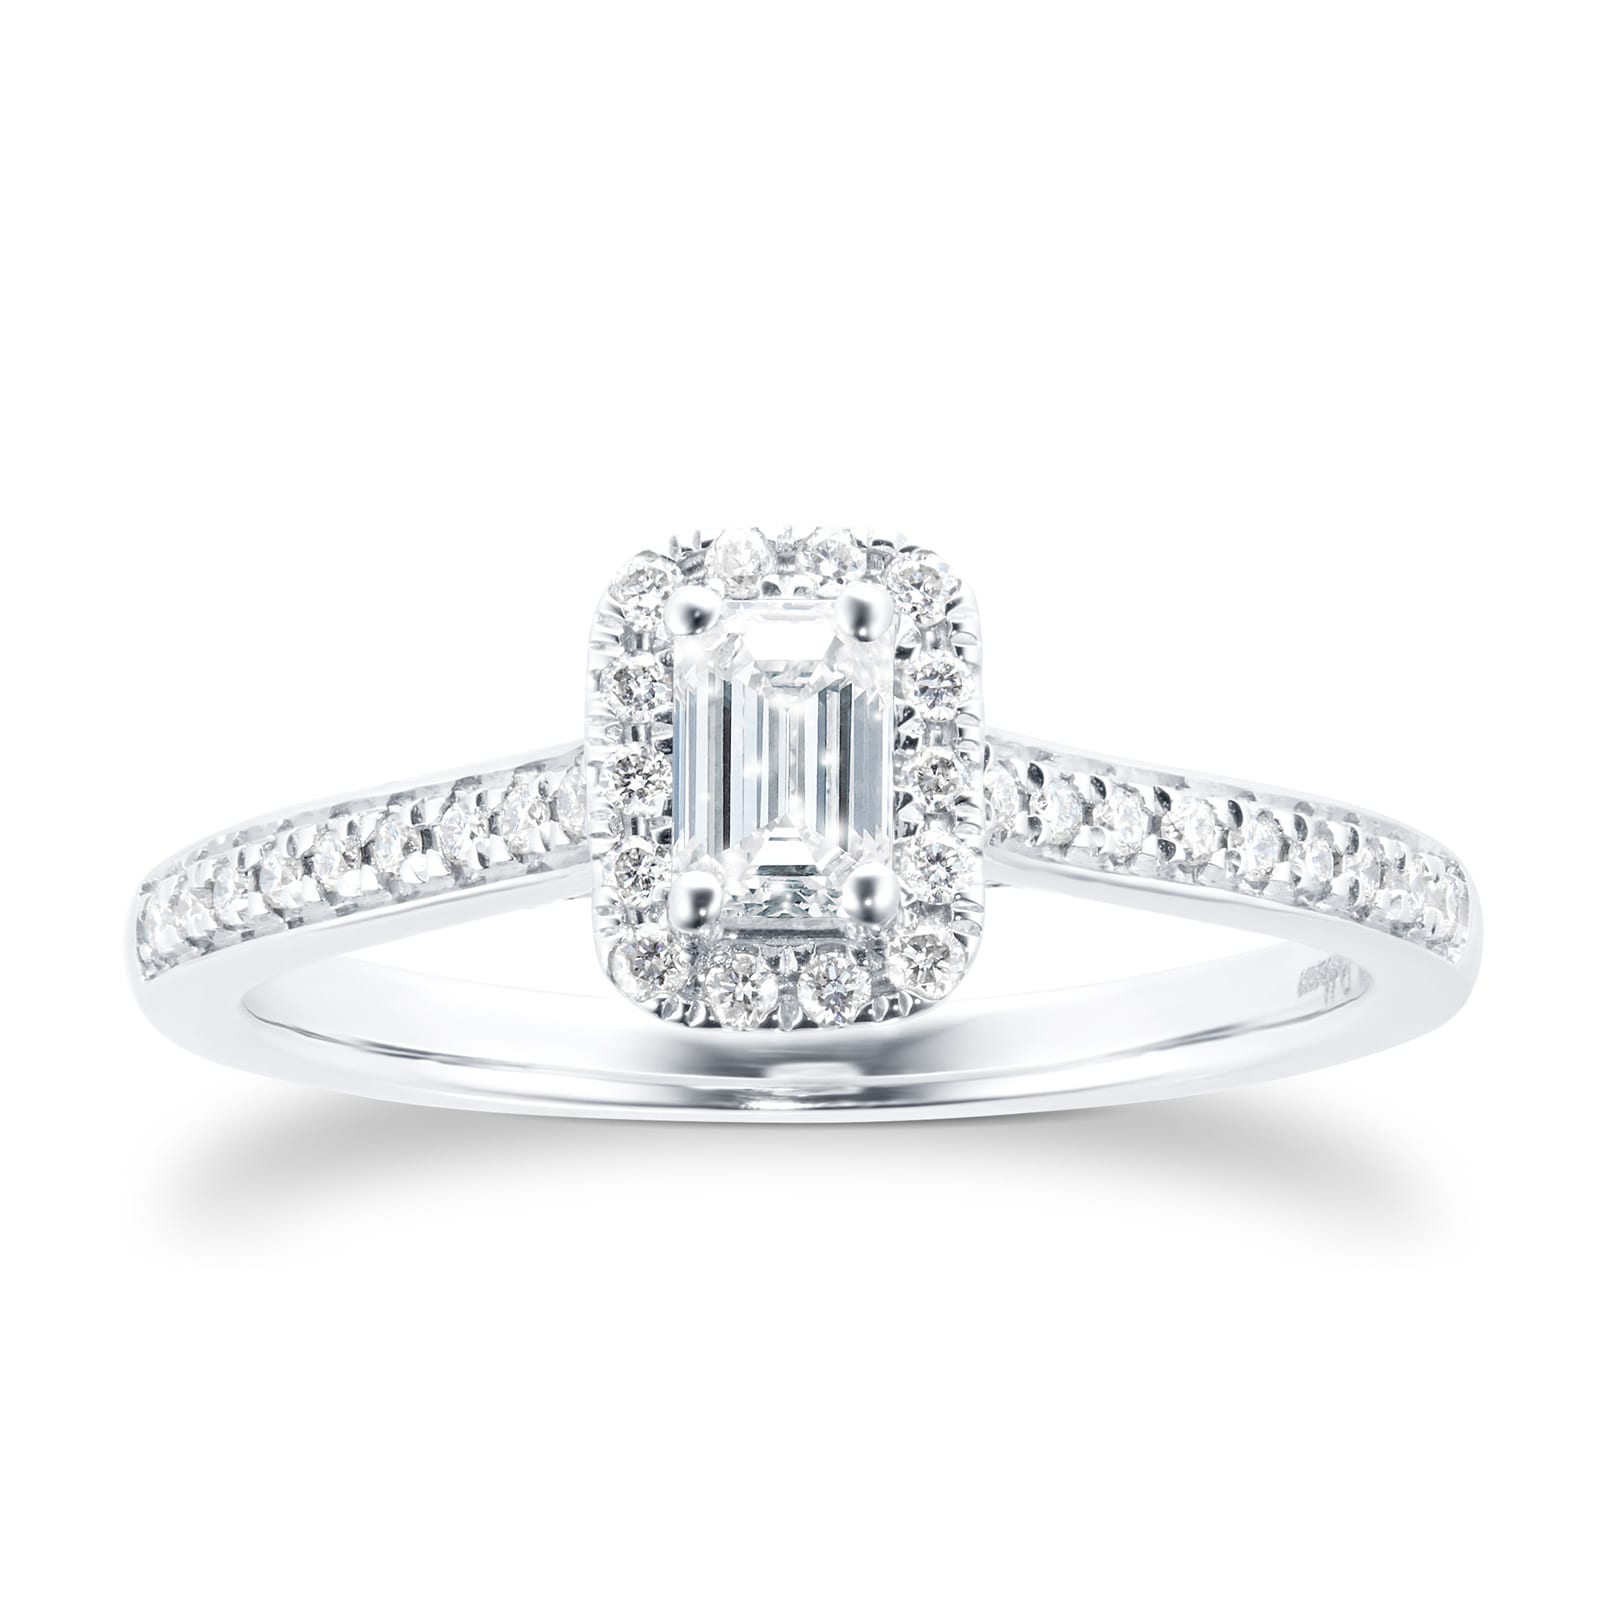 Emerald Cut 0.50ct Halo Diamond Ring In 18ct White Gold - Ring Size M